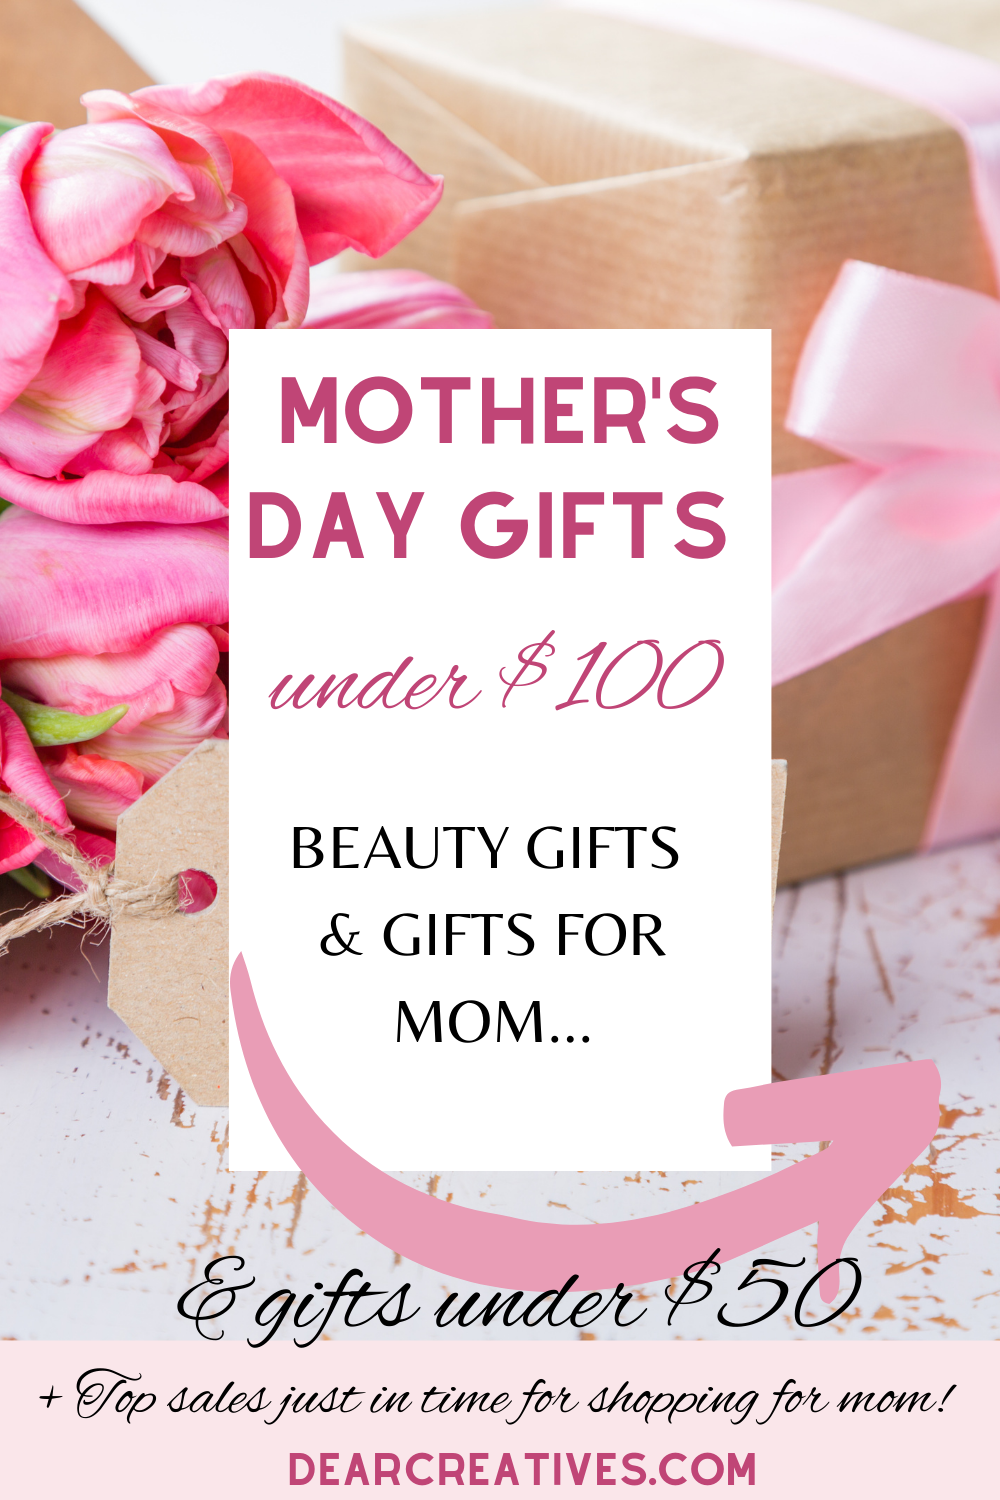 Beauty Gifts For Mom Under $100